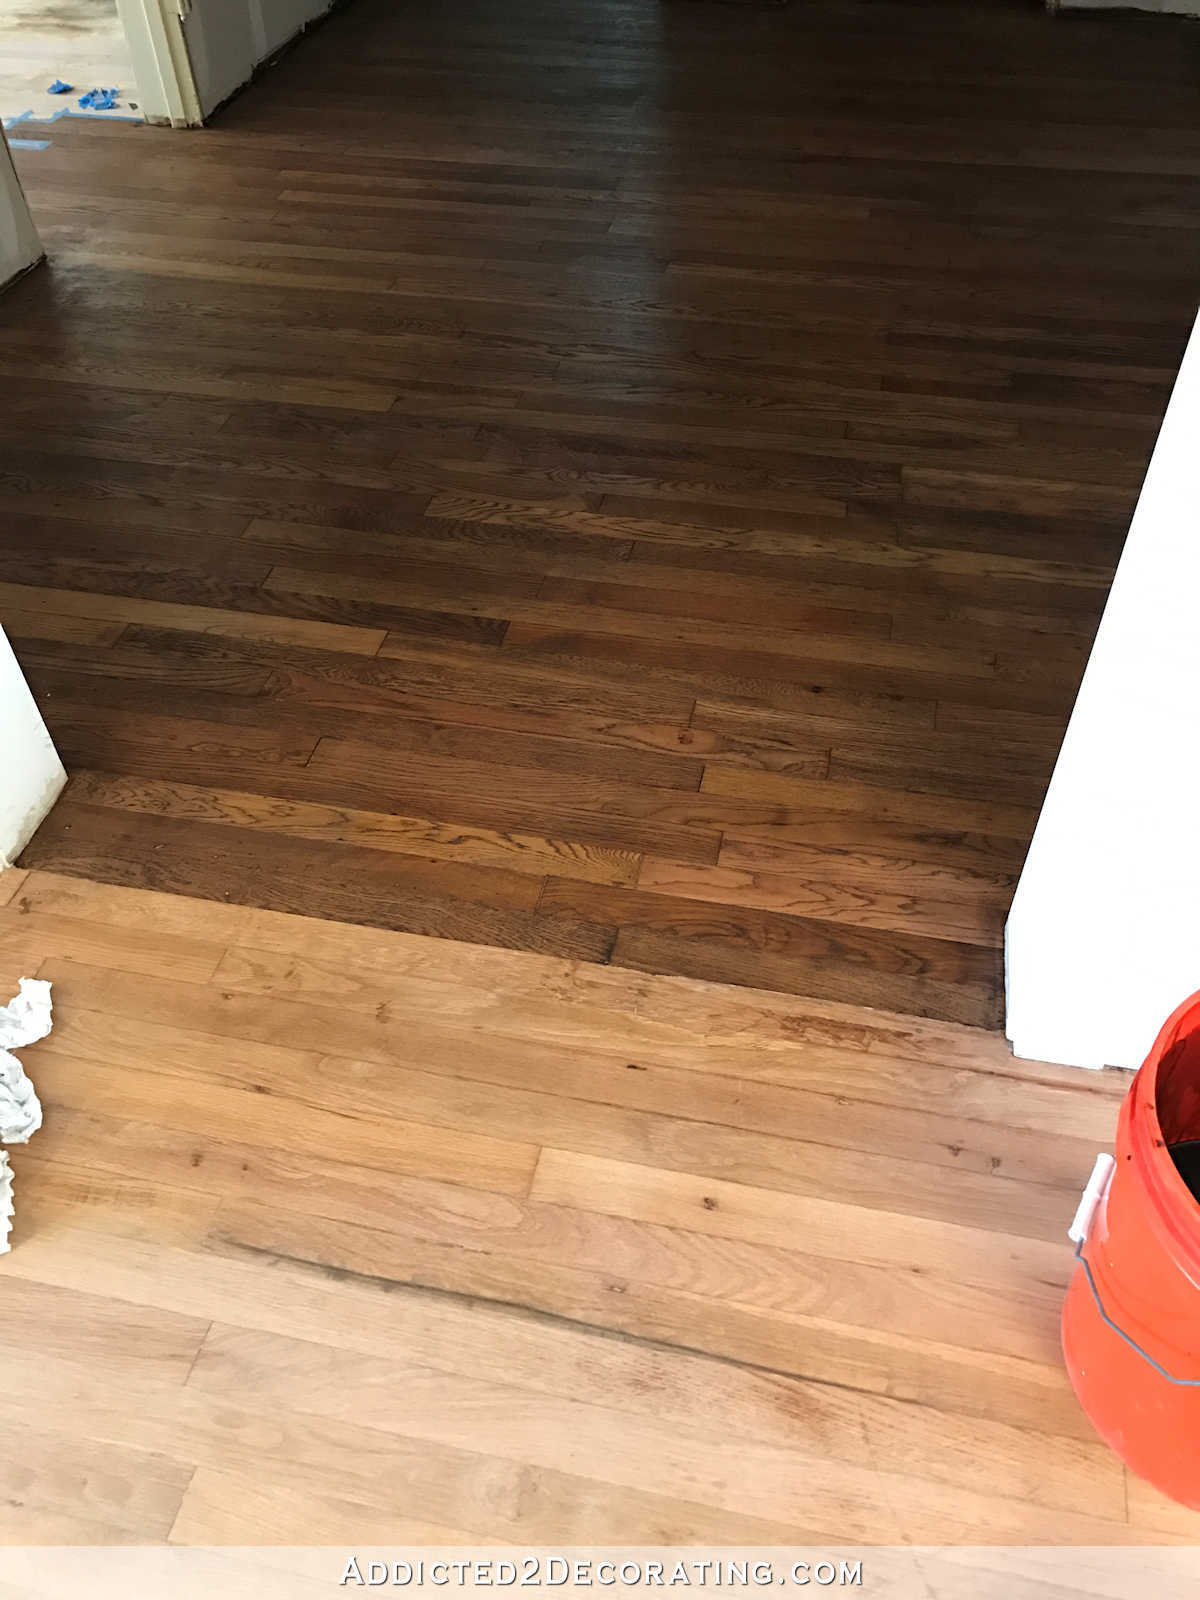 how to refurbish hardwood floors yourself of adventures in staining my red oak hardwood floors products process in staining red oak hardwood floors 2 tape off one section at a time for